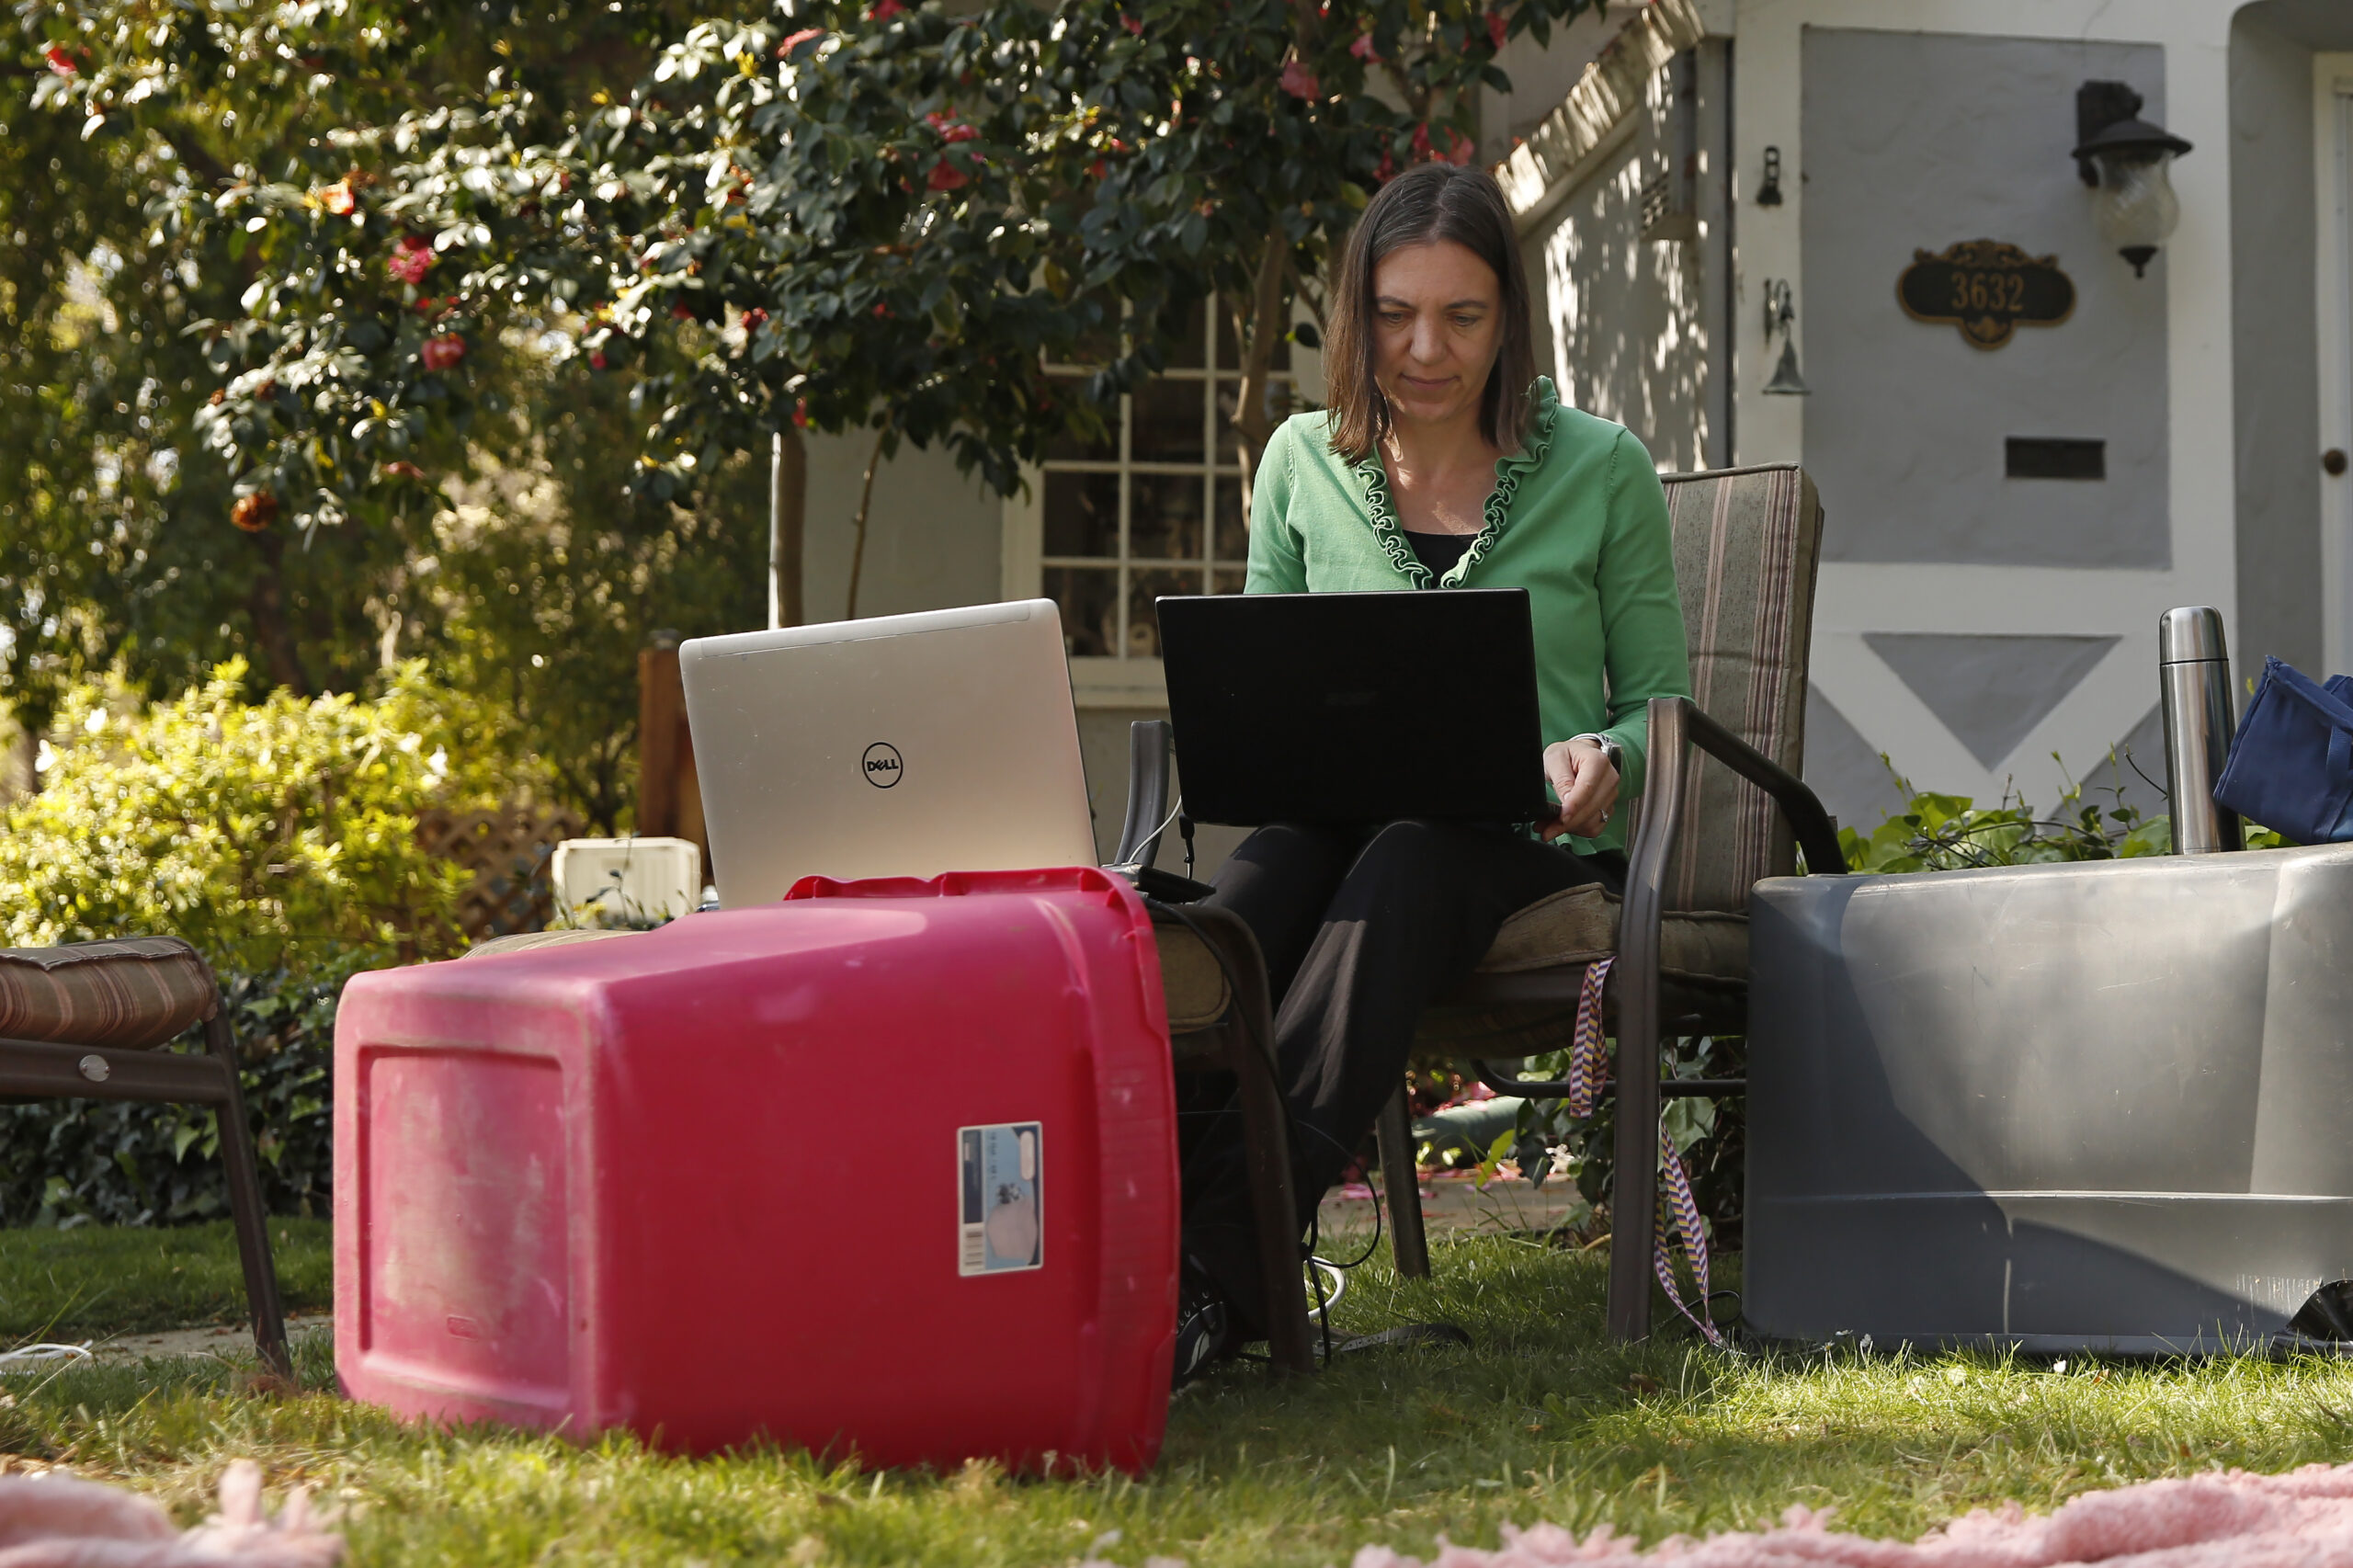 Alison Steffensen works at the home office she set up in the front yard of her home in Sacramento, Calif.